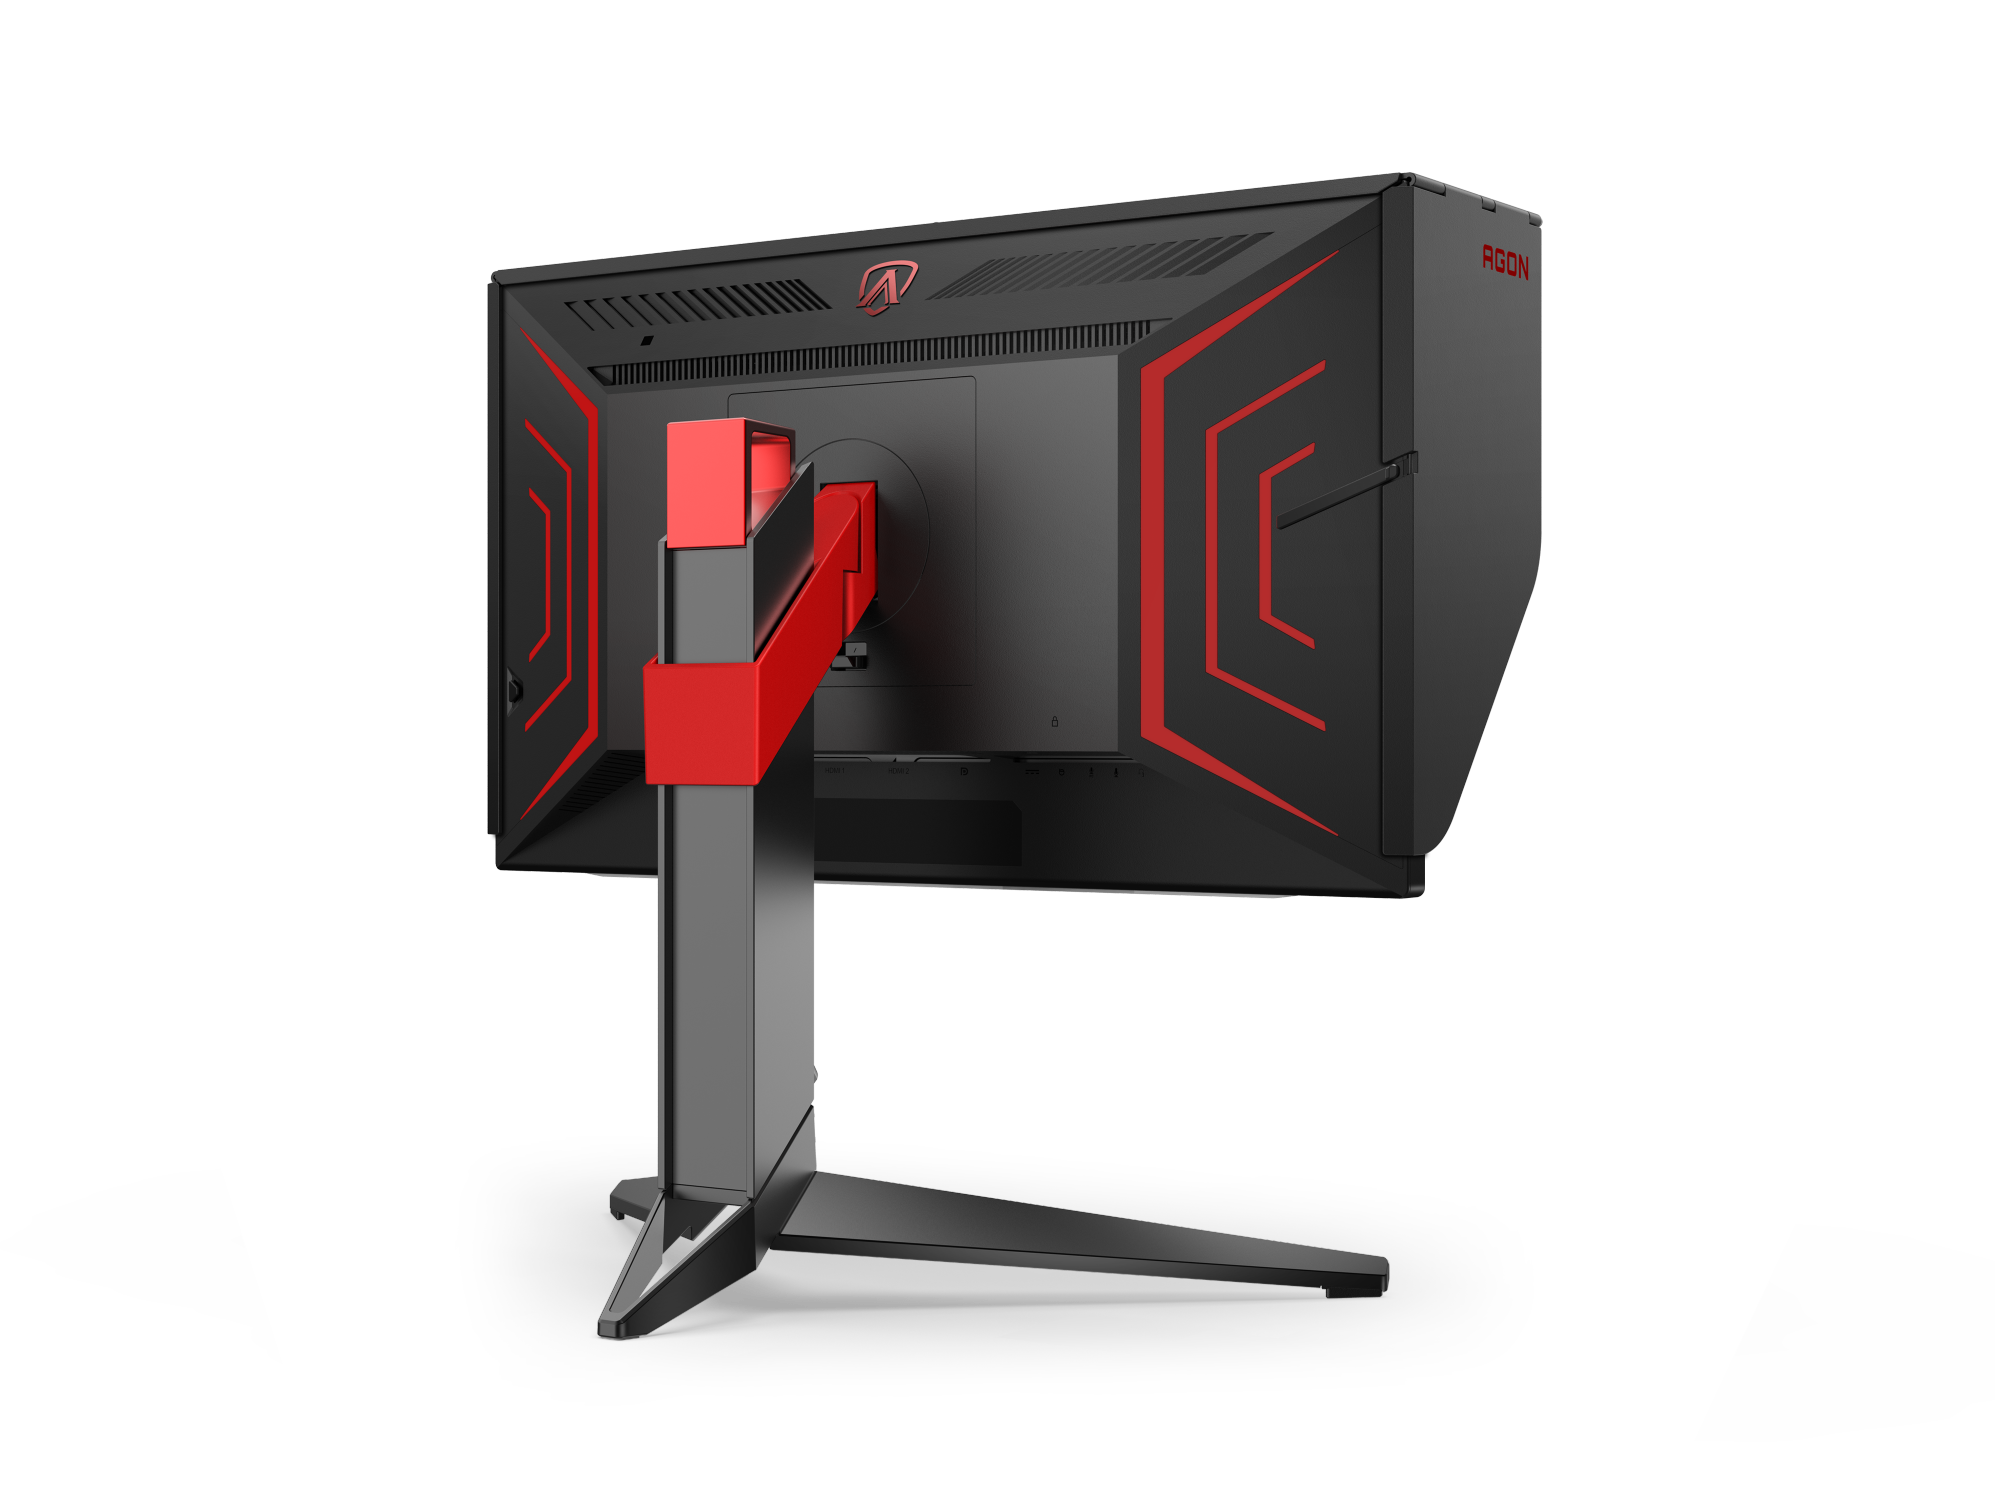 AOC AG254FG 24.5in IPS 360Hz 1920X1080 HDR400 Gsync Gaming Monitor